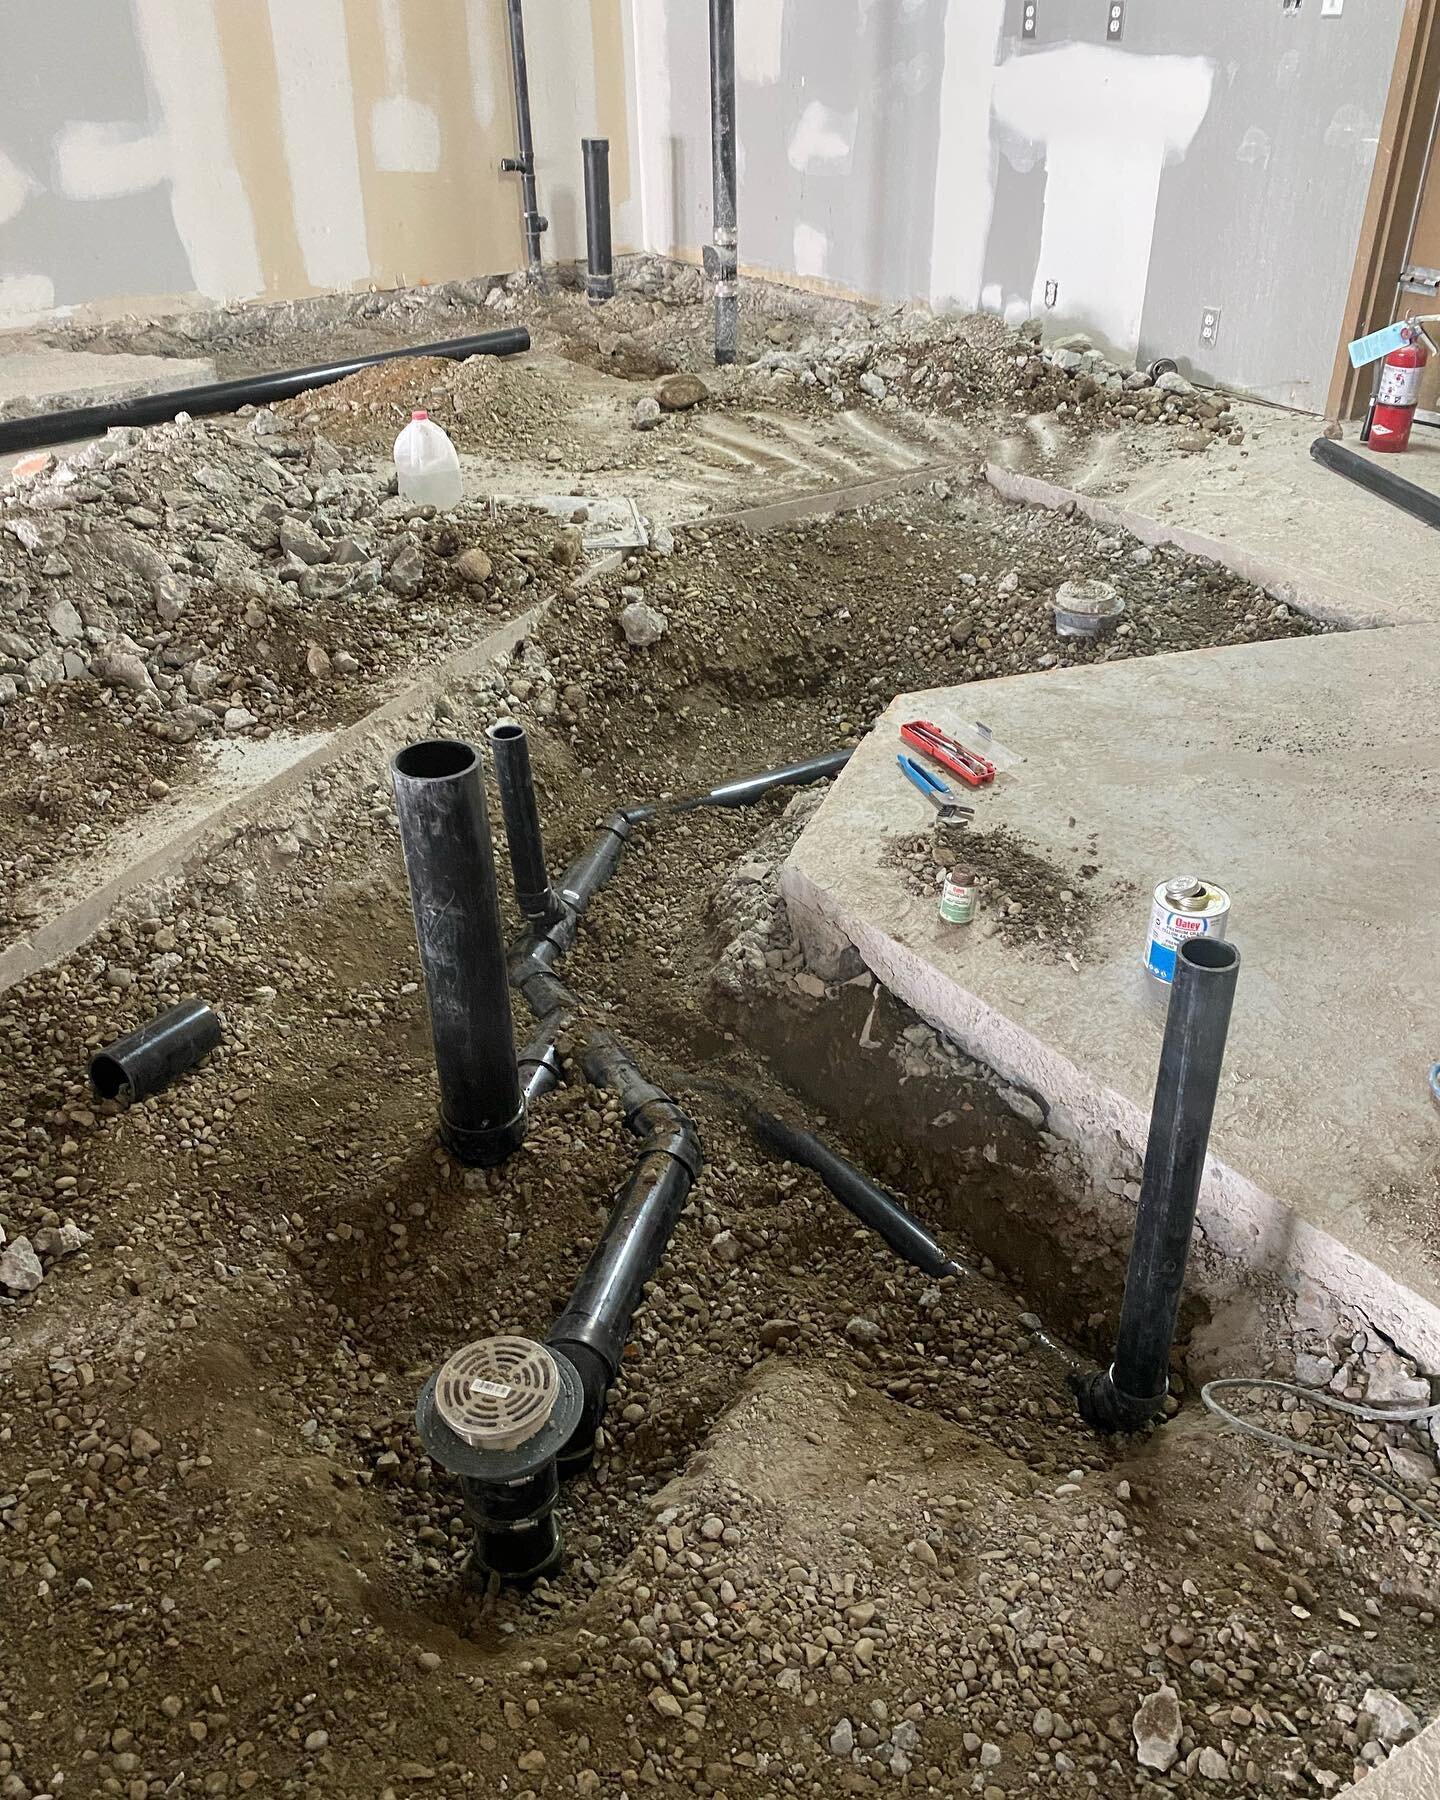 Sharing a couple shots of some ground works for a new project we &ldquo;dug into&rdquo; last week! 
&bull;
Rough-in for a new bathroom, and a commercial kitchen!
&bull;
Special thanks to @yycelectrician for all the help in the trenches!
&bull;
&bull;